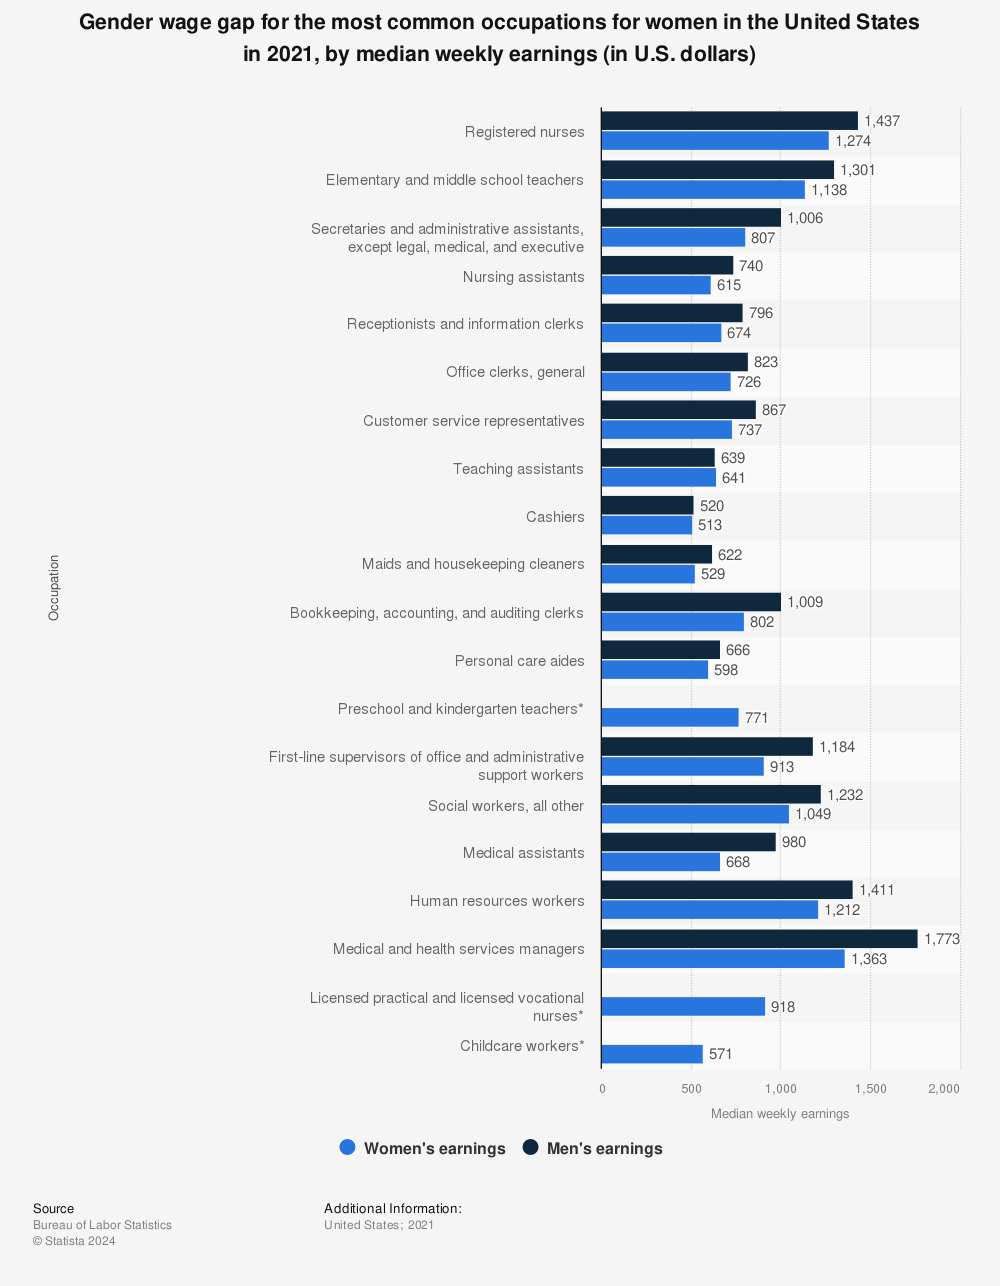 Statistic: Gender wage gap for the most common occupations for women in the United States in 2021, by median weekly earnings (in U.S. dollars) | Statista